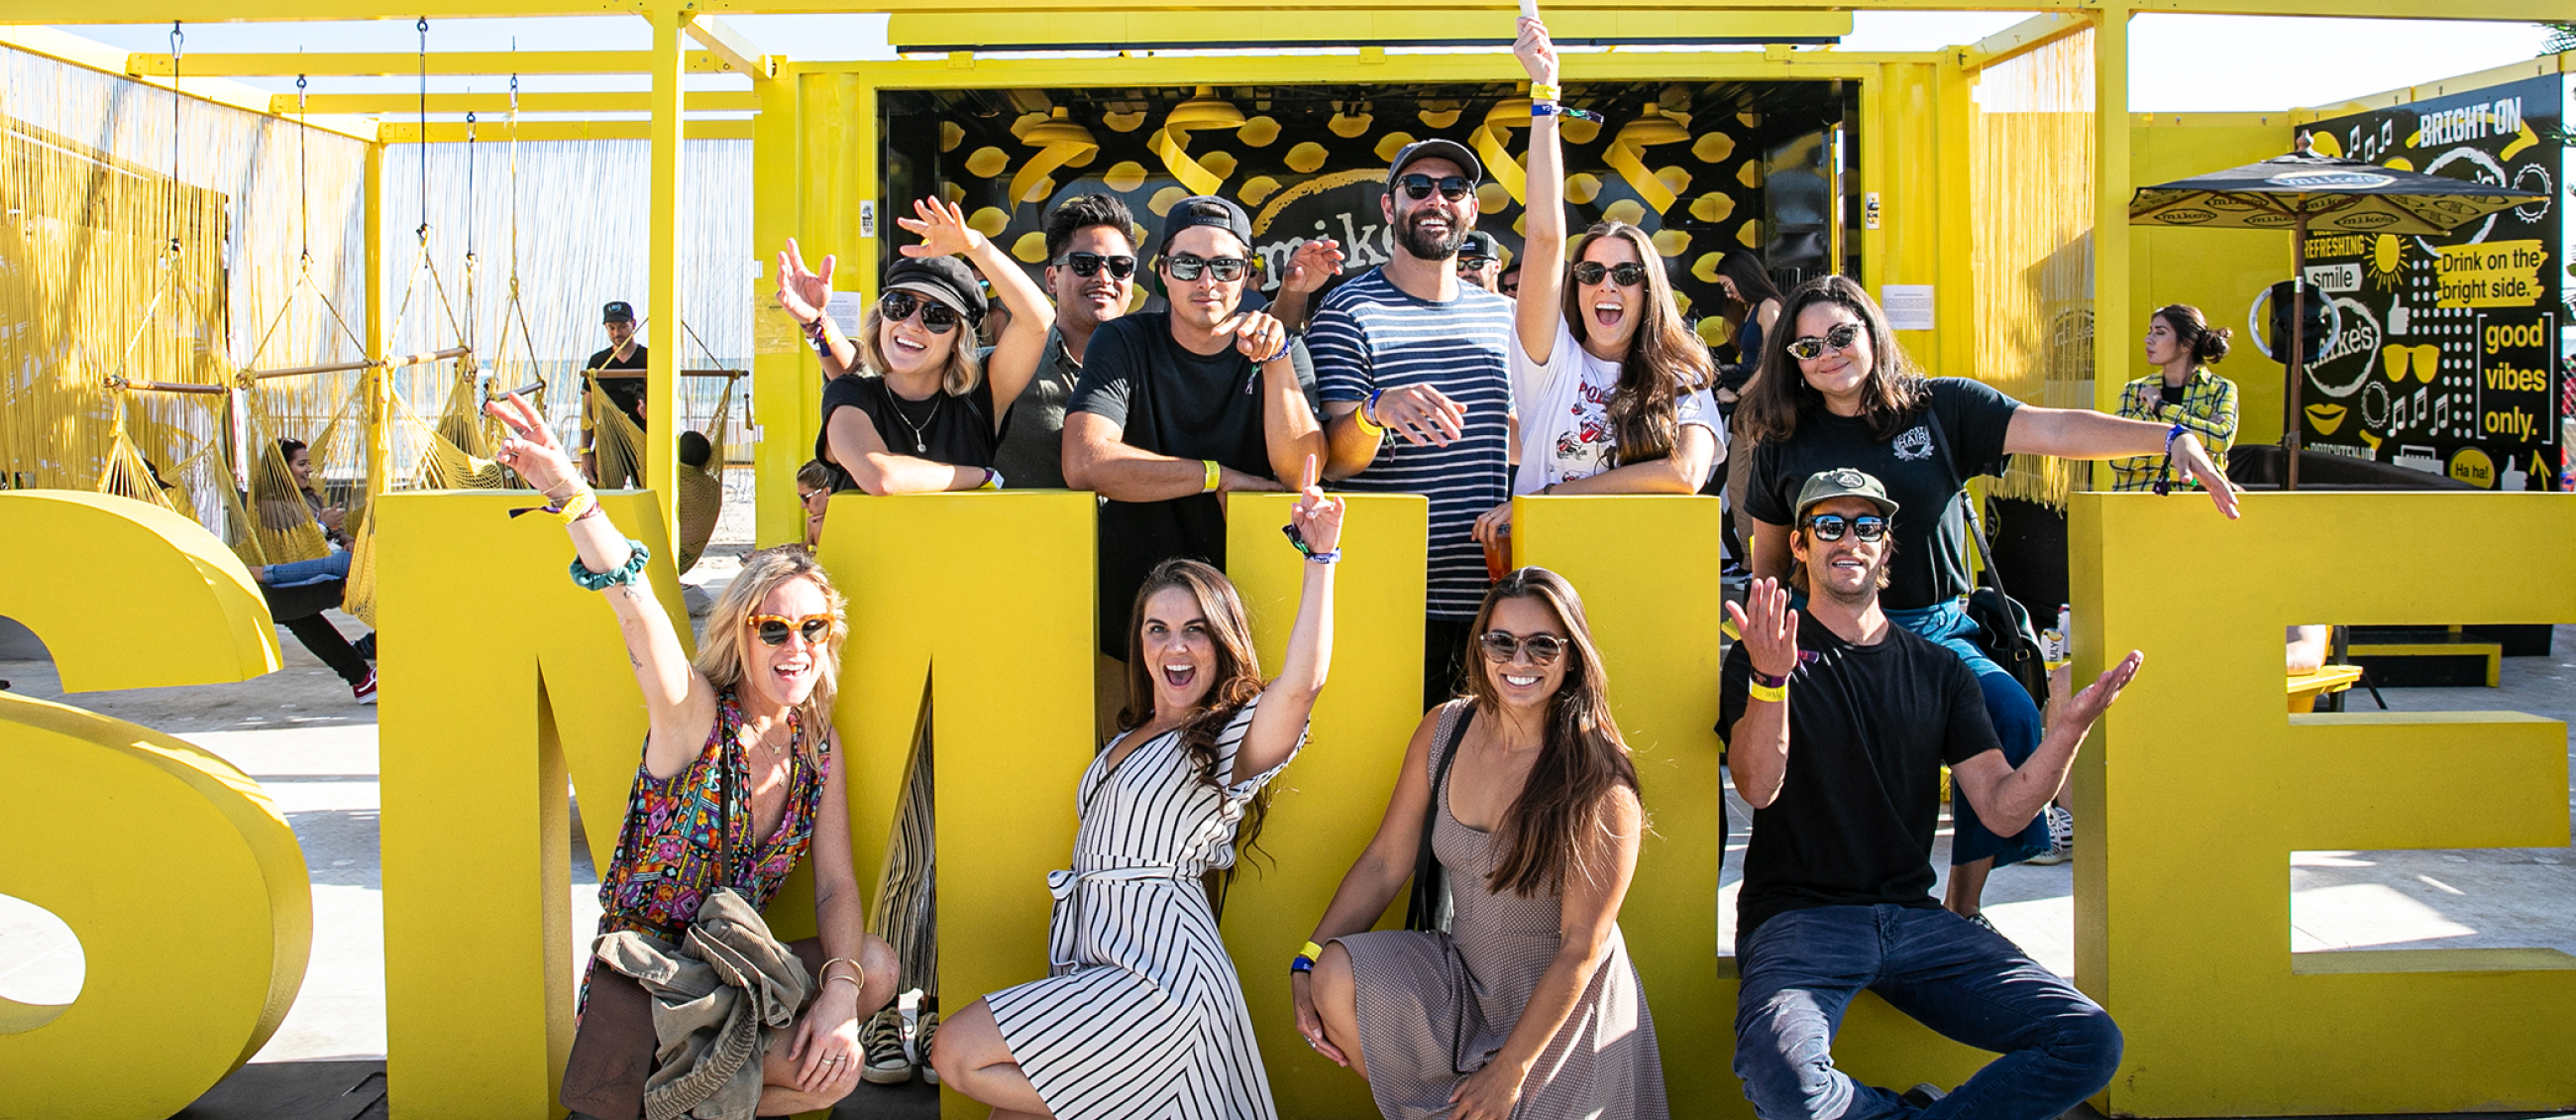 People smile for the camera at the Mike's Hard Lemonade activation event.